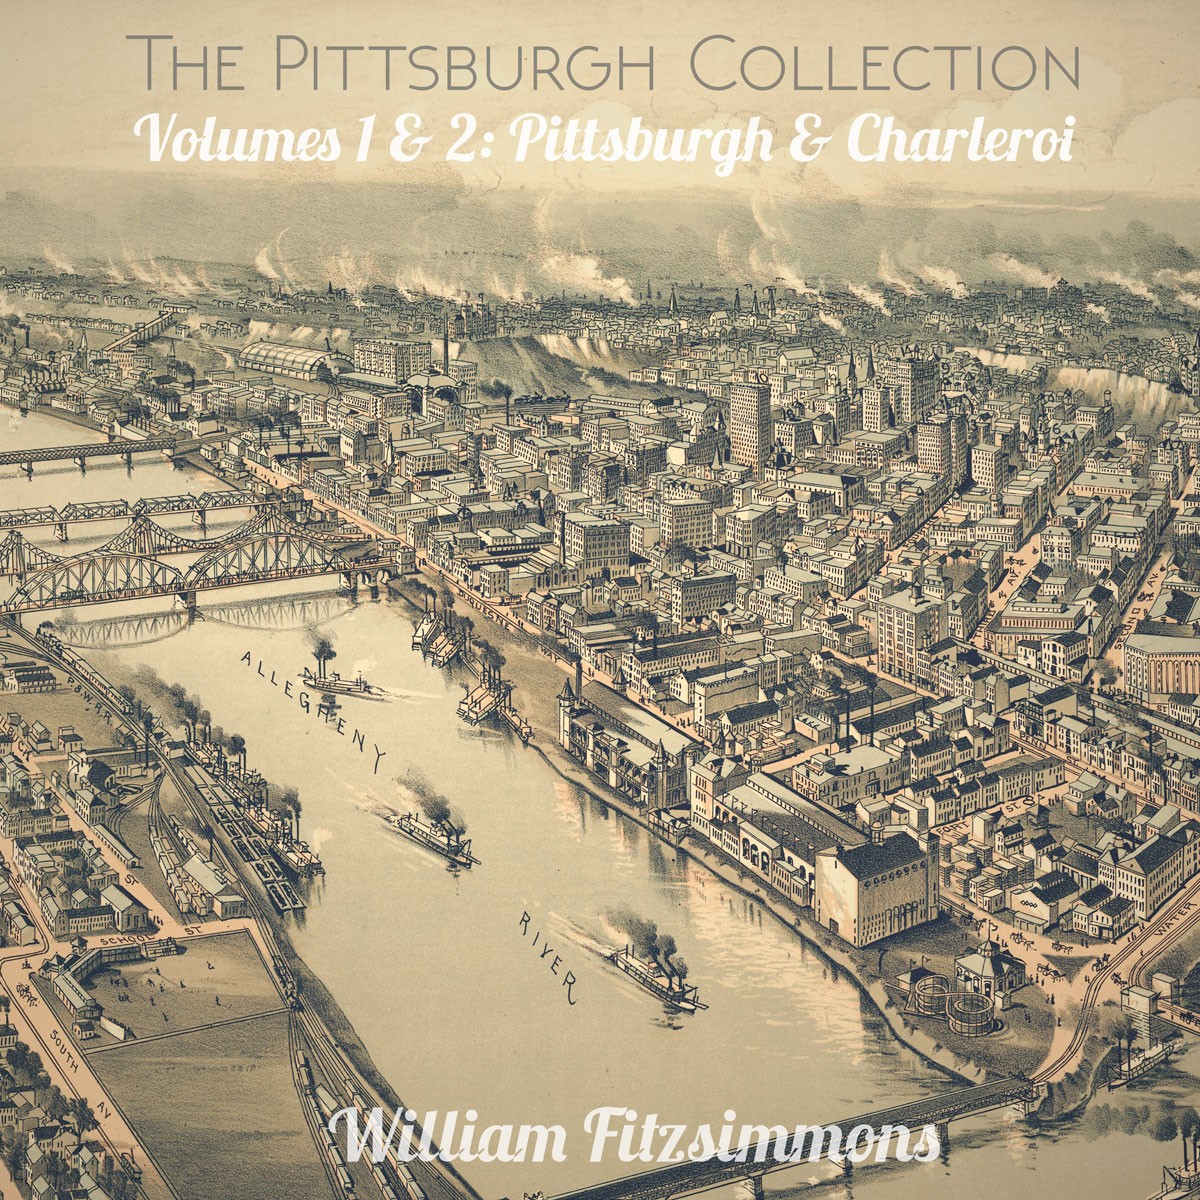 PRE-ORDER: The Pittsburgh Collection